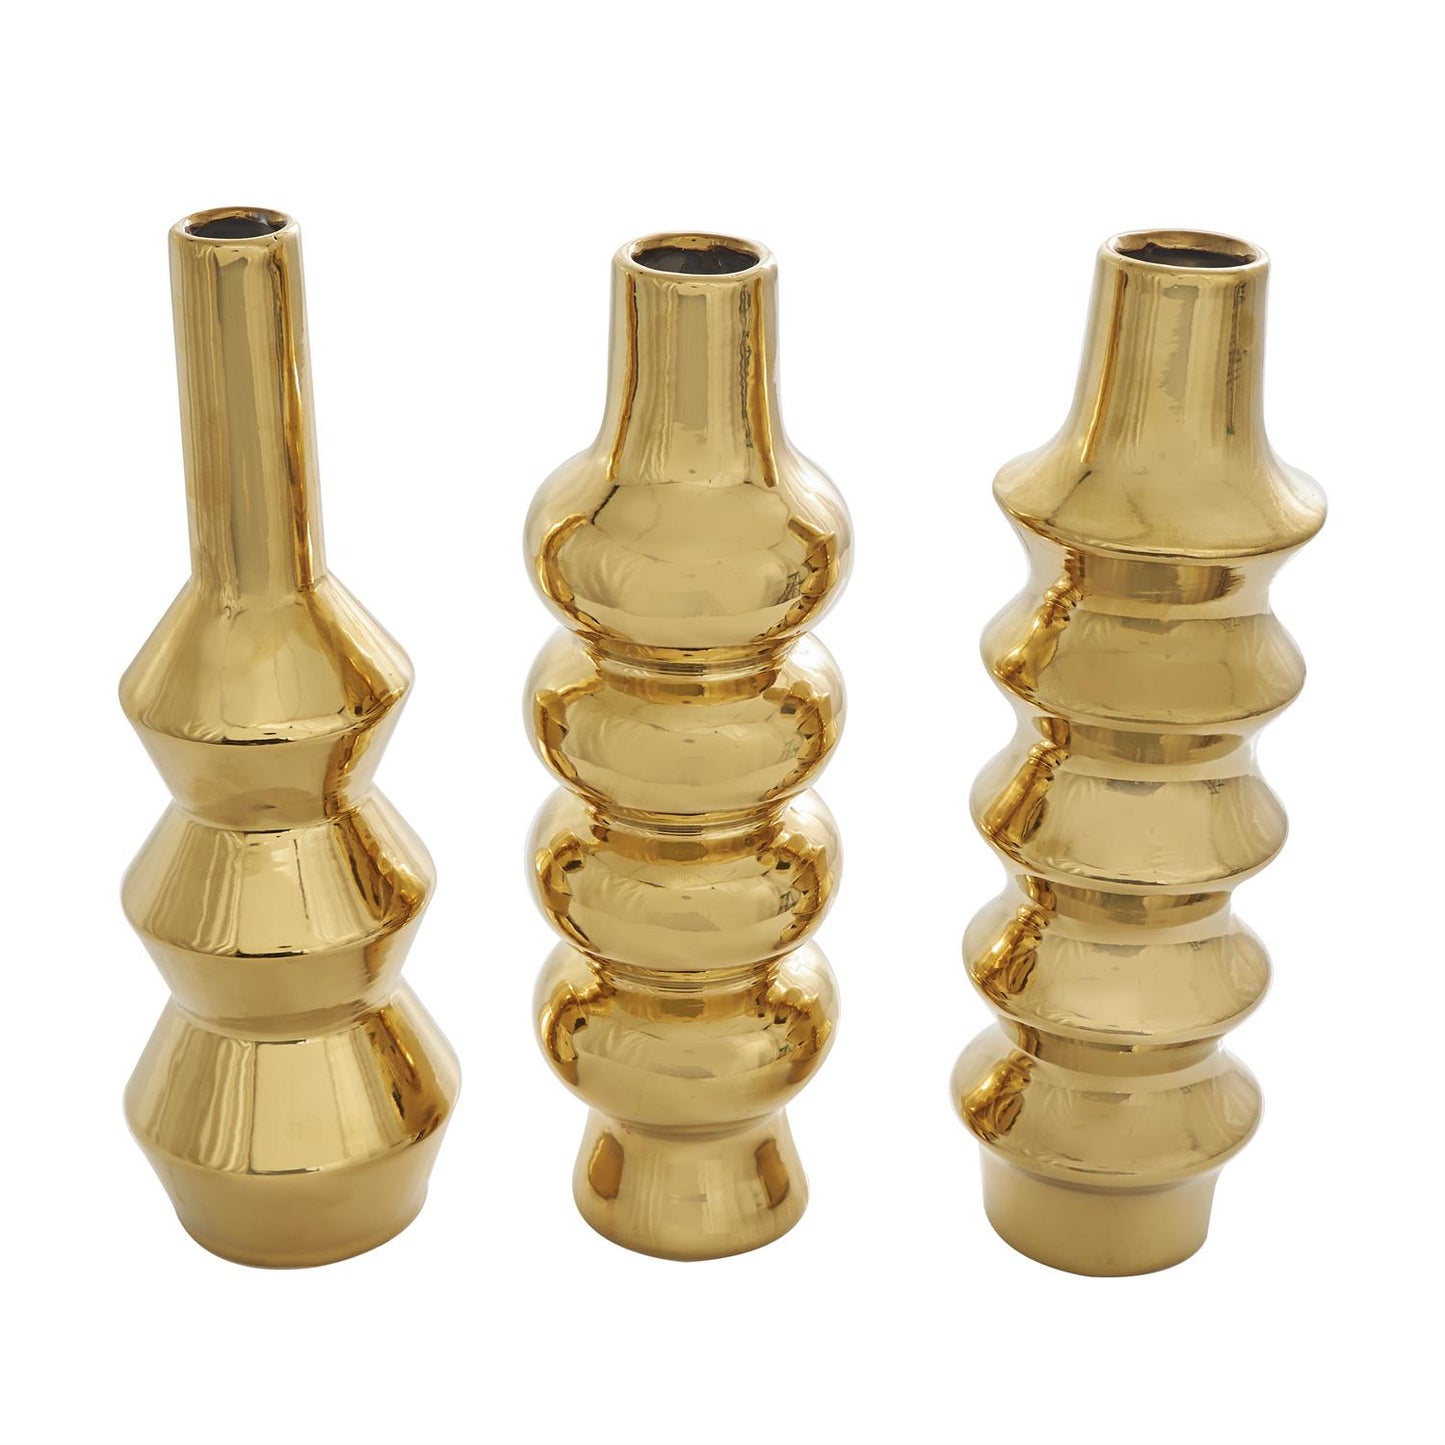 Gold ceramic Abstract Bubble inspired Vase set of 3